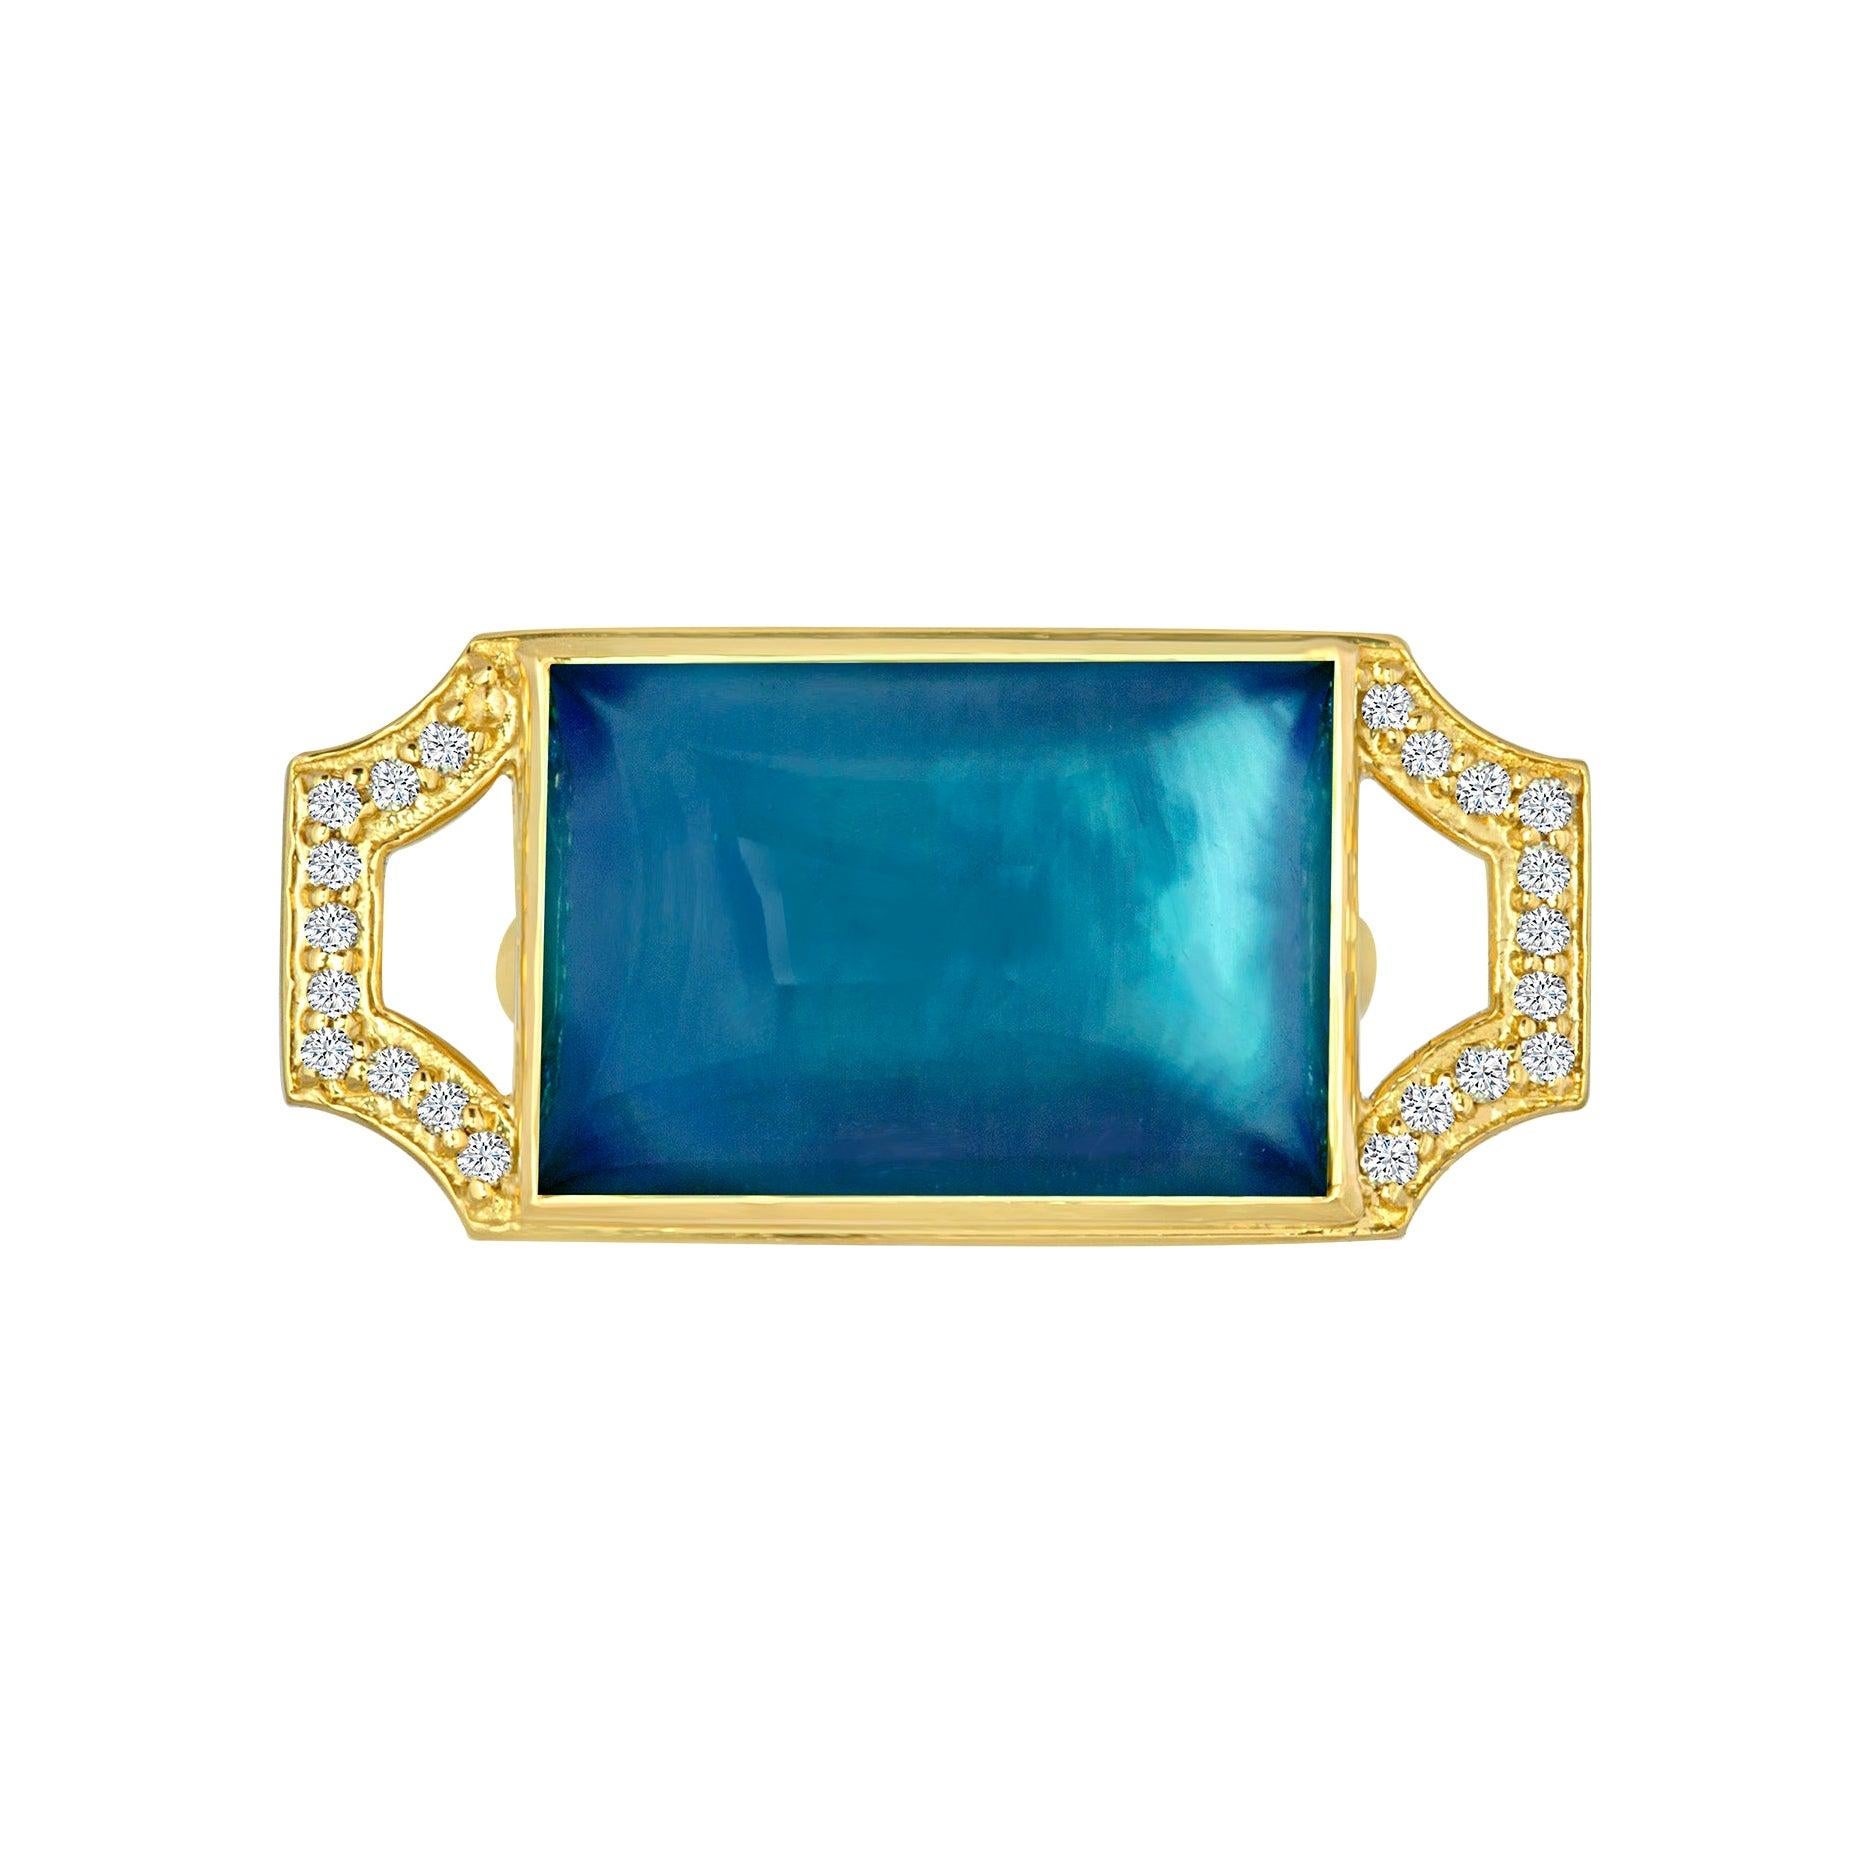 For Sale:  18 Karat Gold Statement Ring with Labradorite and Diamonds